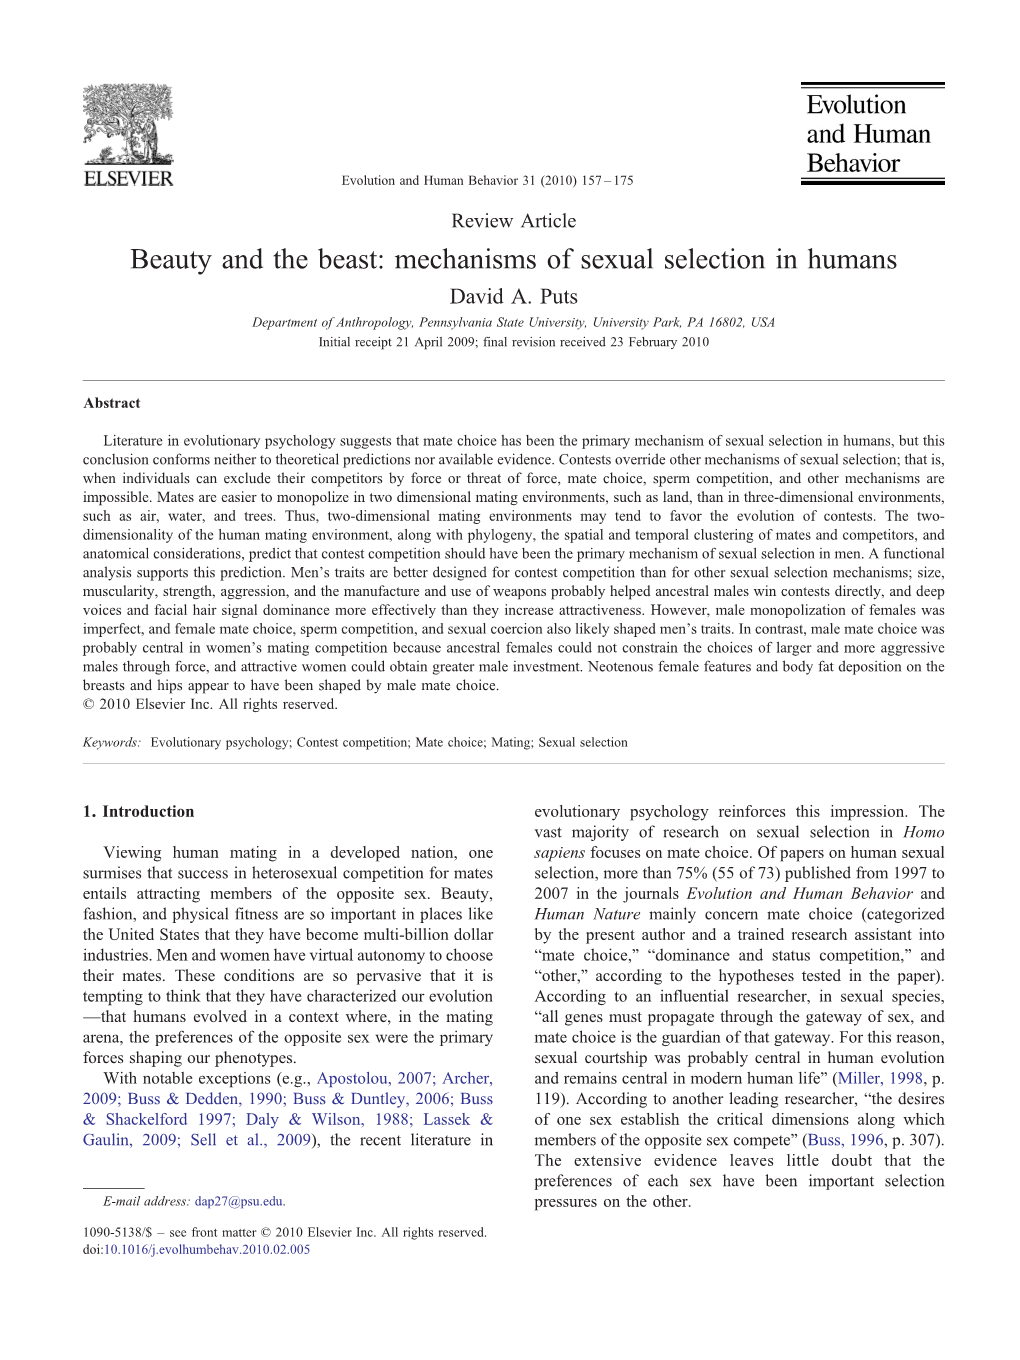 Beauty and the Beast: Mechanisms of Sexual Selection in Humans David A